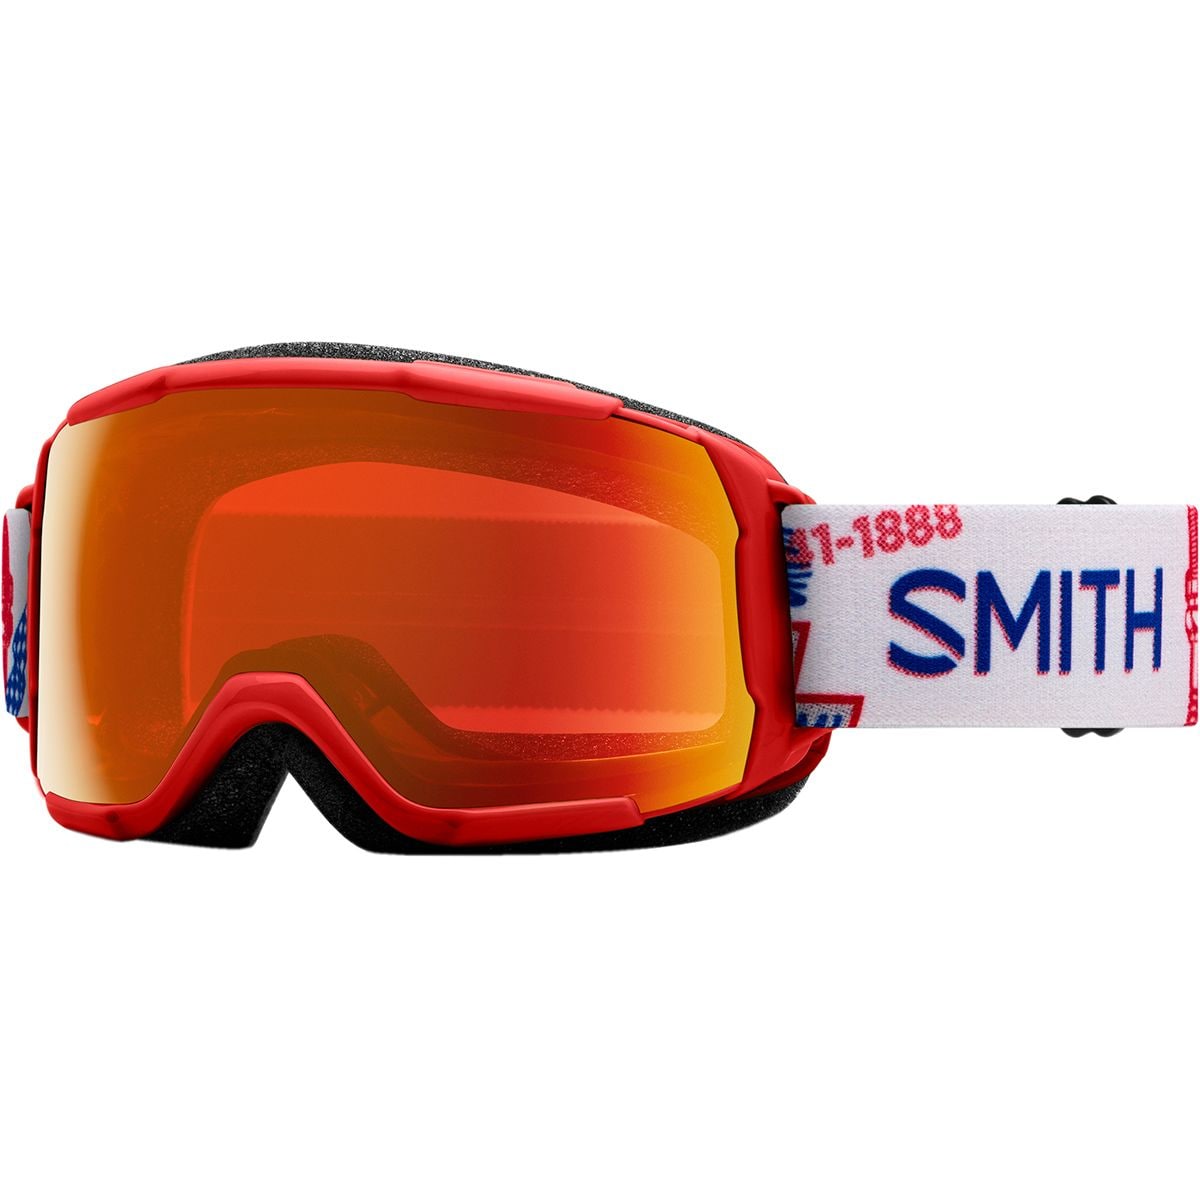 Smith Grom ChromaPop Goggles - Kids' Help Wanted/Chroma Ed Red Mir